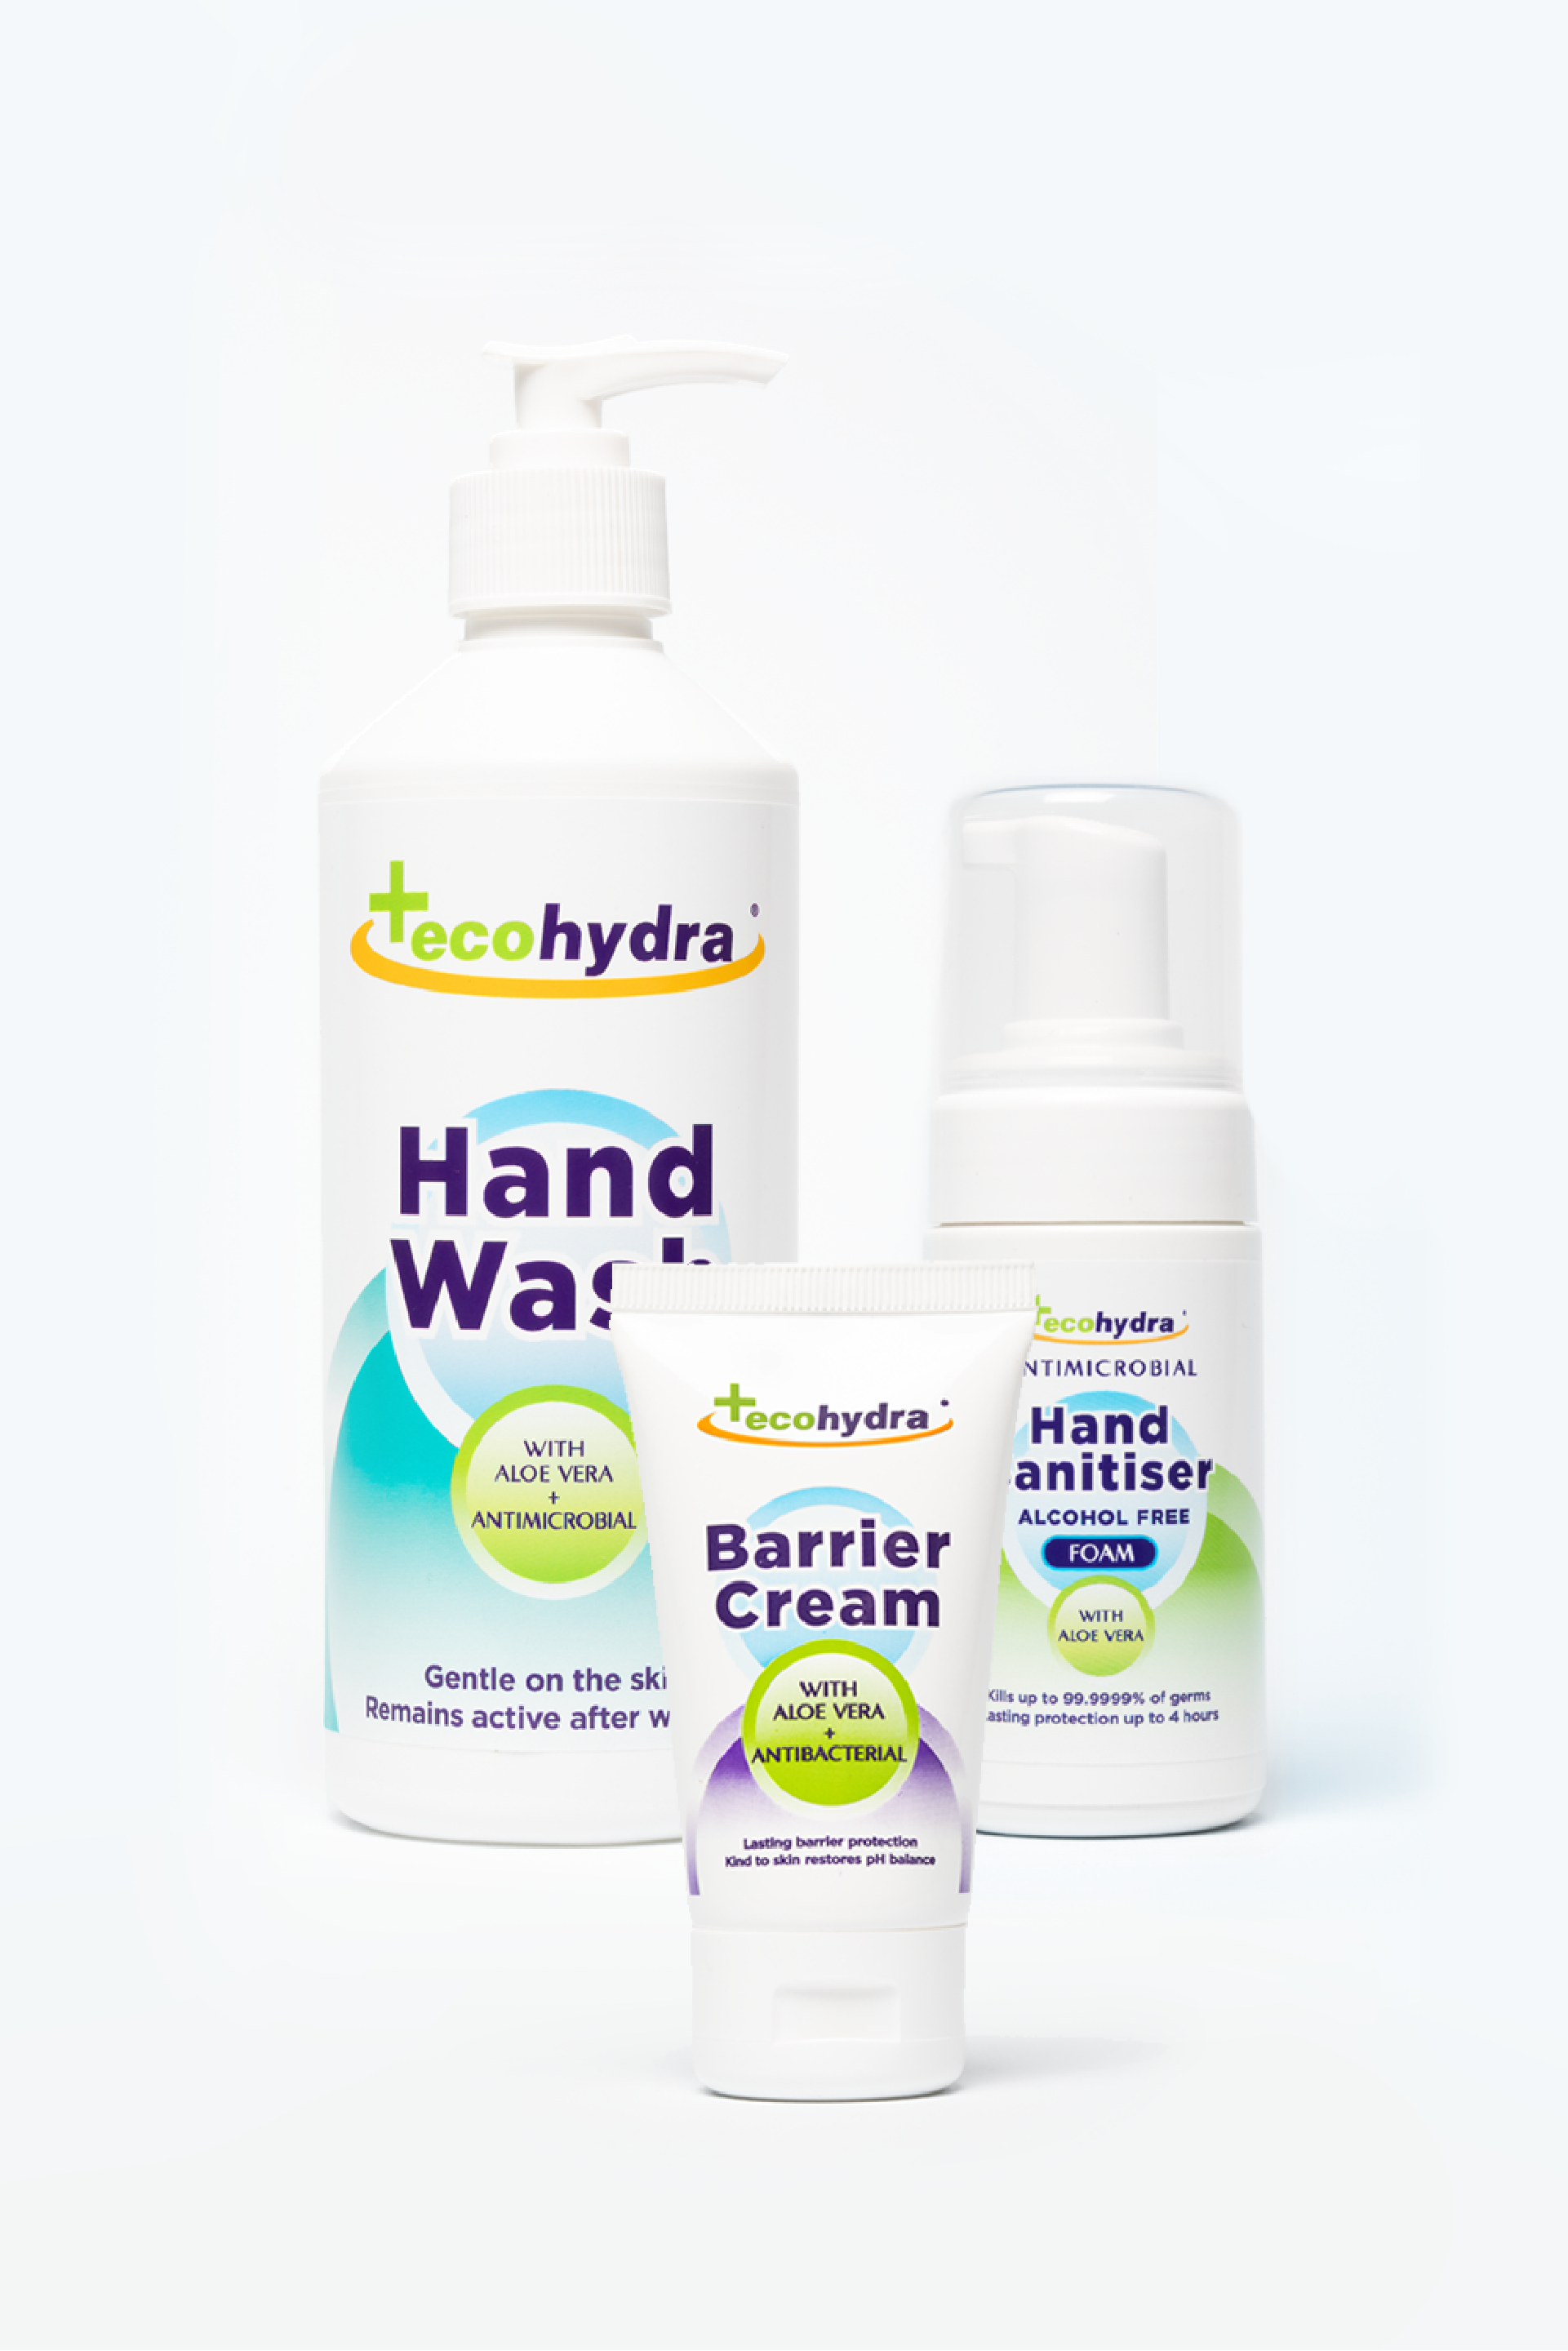 The Total Hand Care Bundle